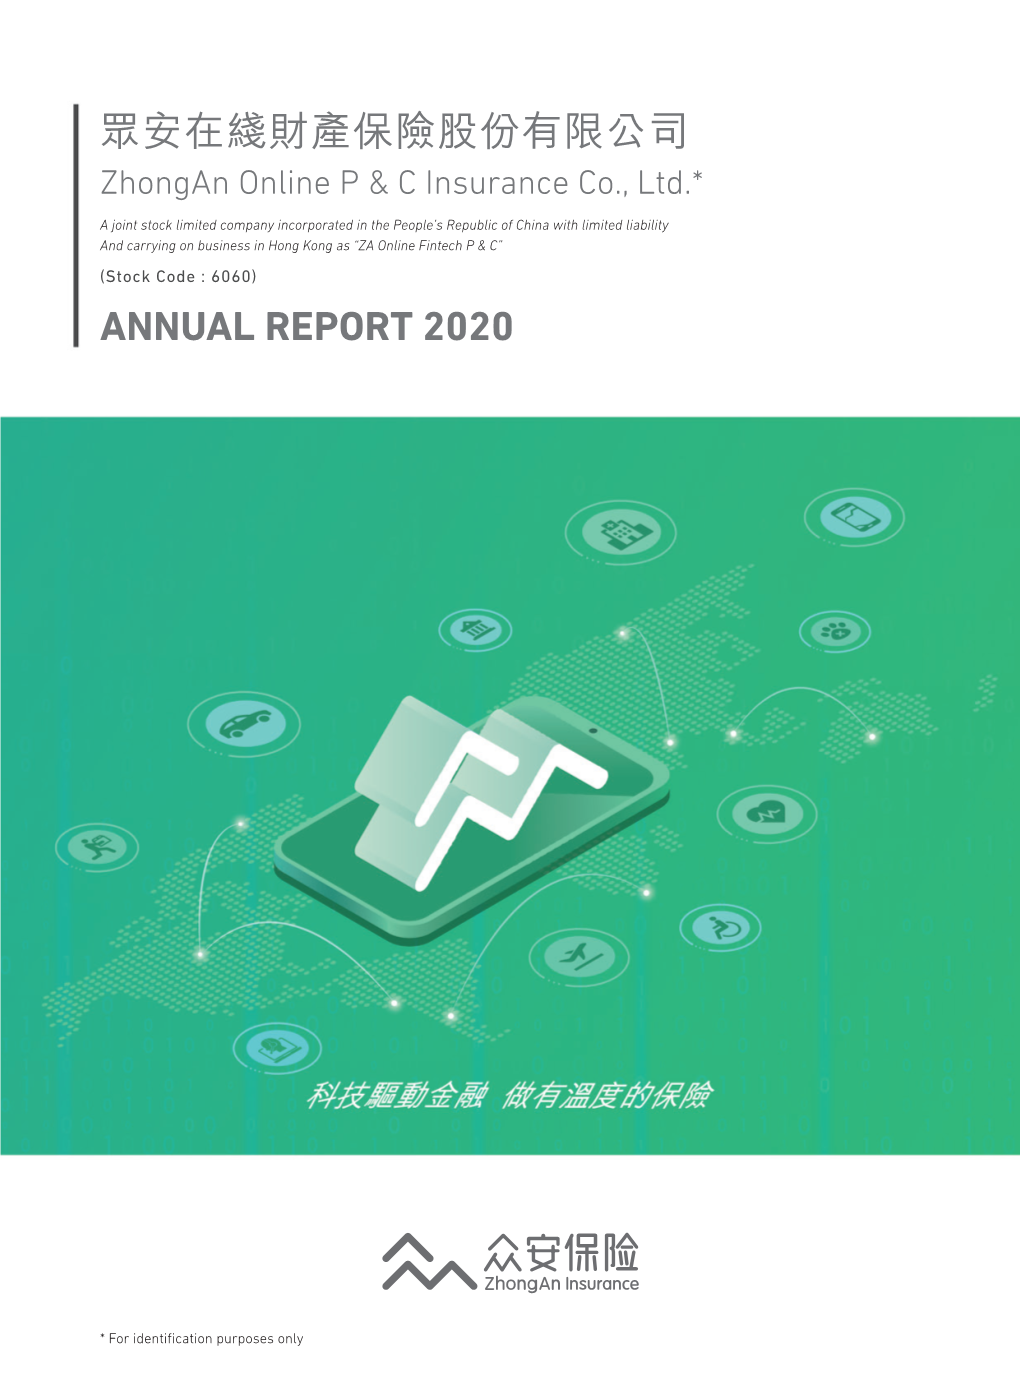 Annual Report 2020 Five-Year Financial Summary